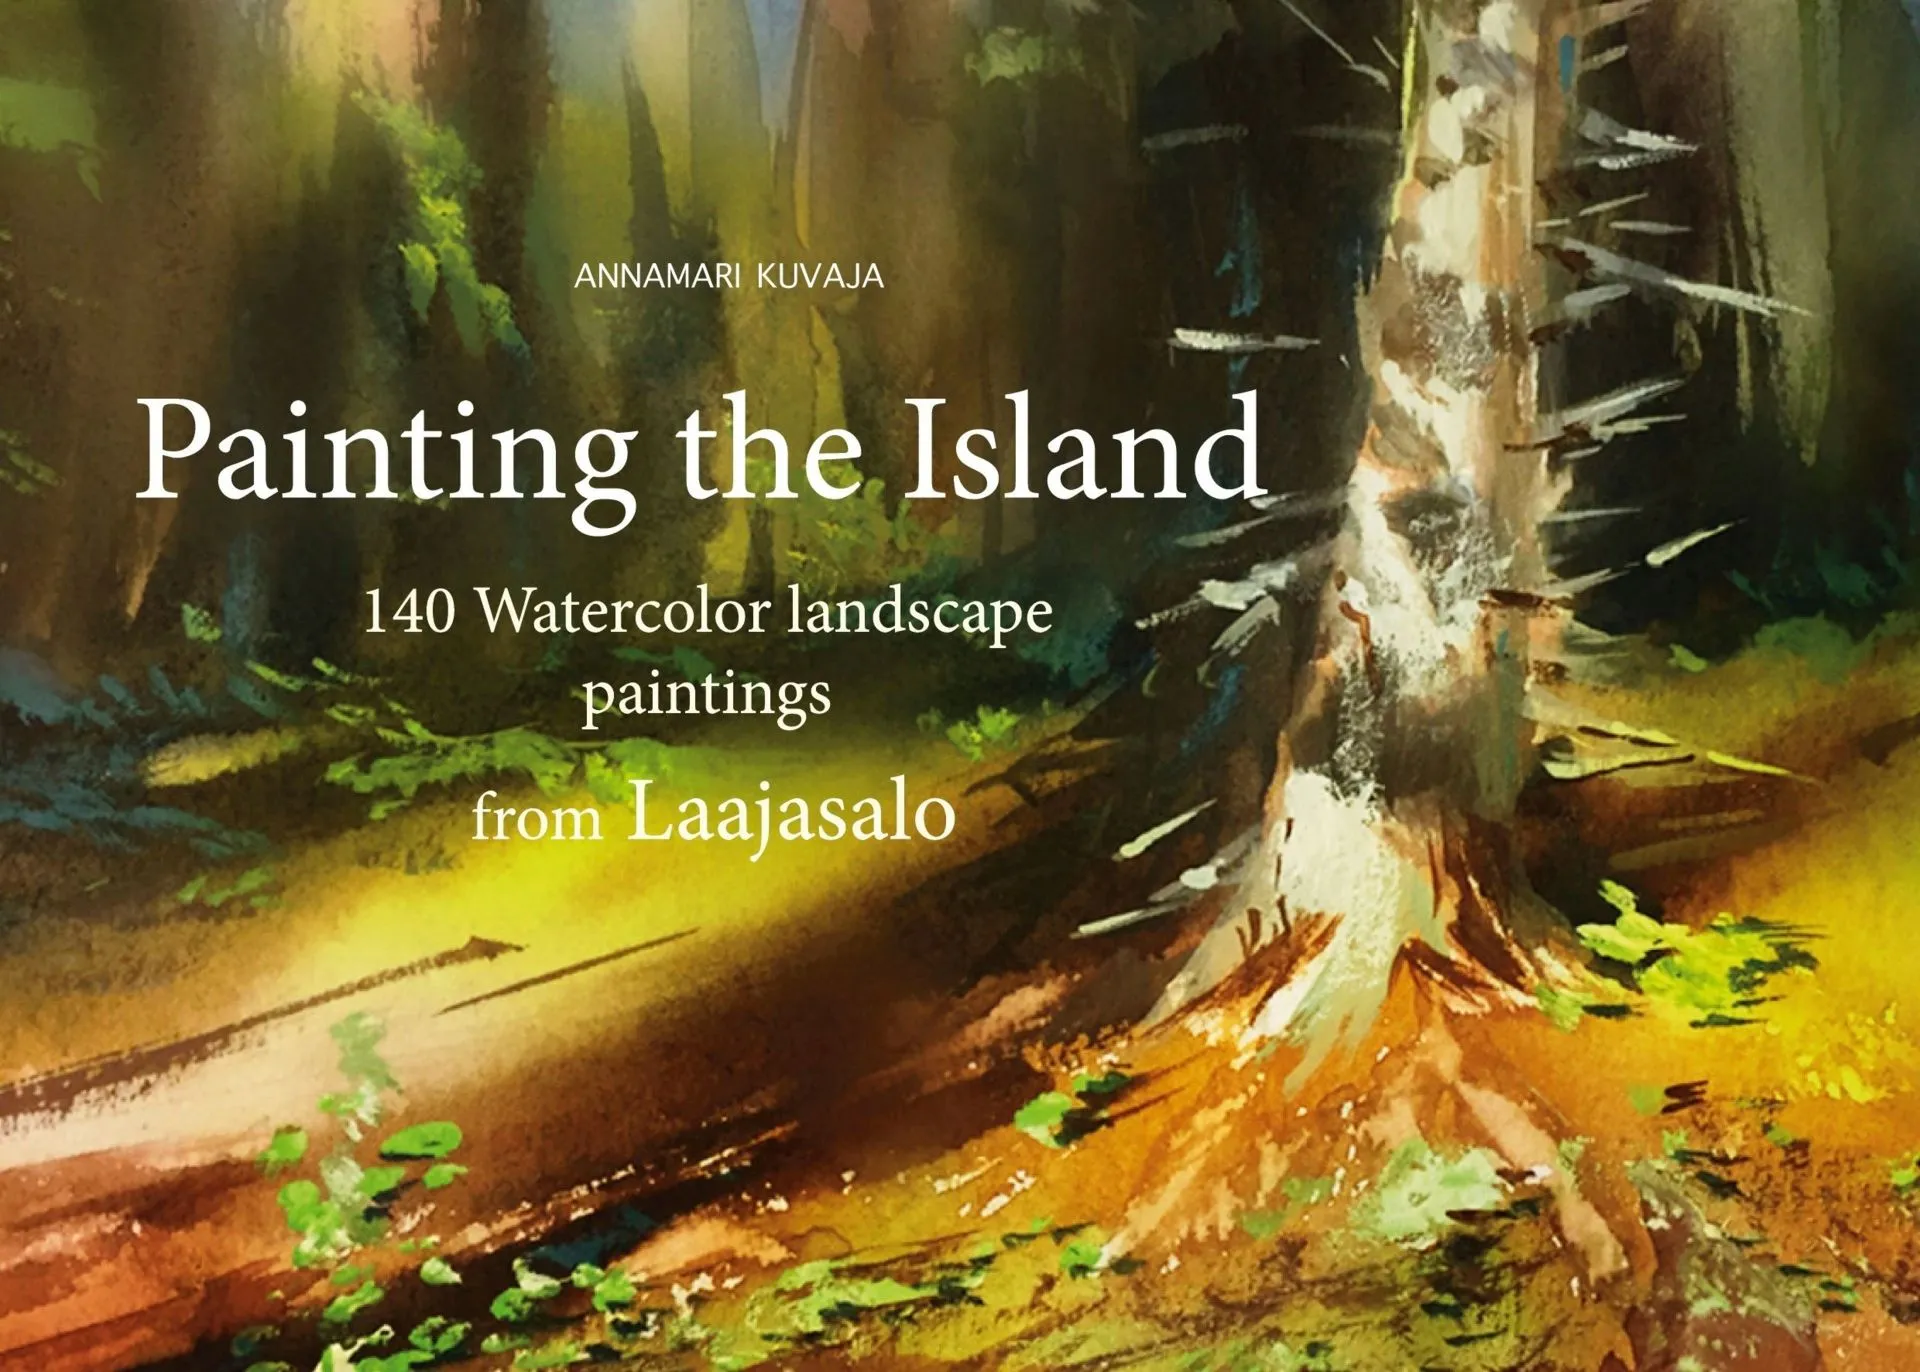 Kuvaja, Painting the island - 140 Watercolor landscape paintings from Laajasalo